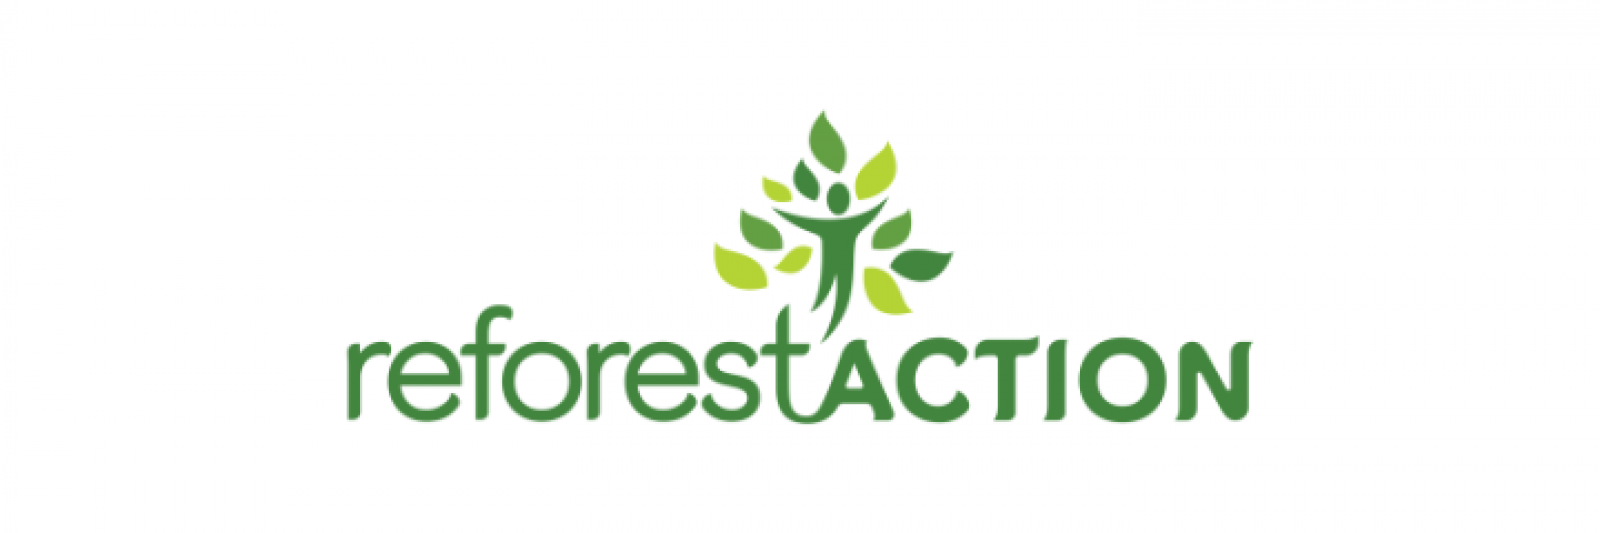 SRO Motorsports Group adds reforestation project in Belgian Ardennes to expanding sustainability programme  